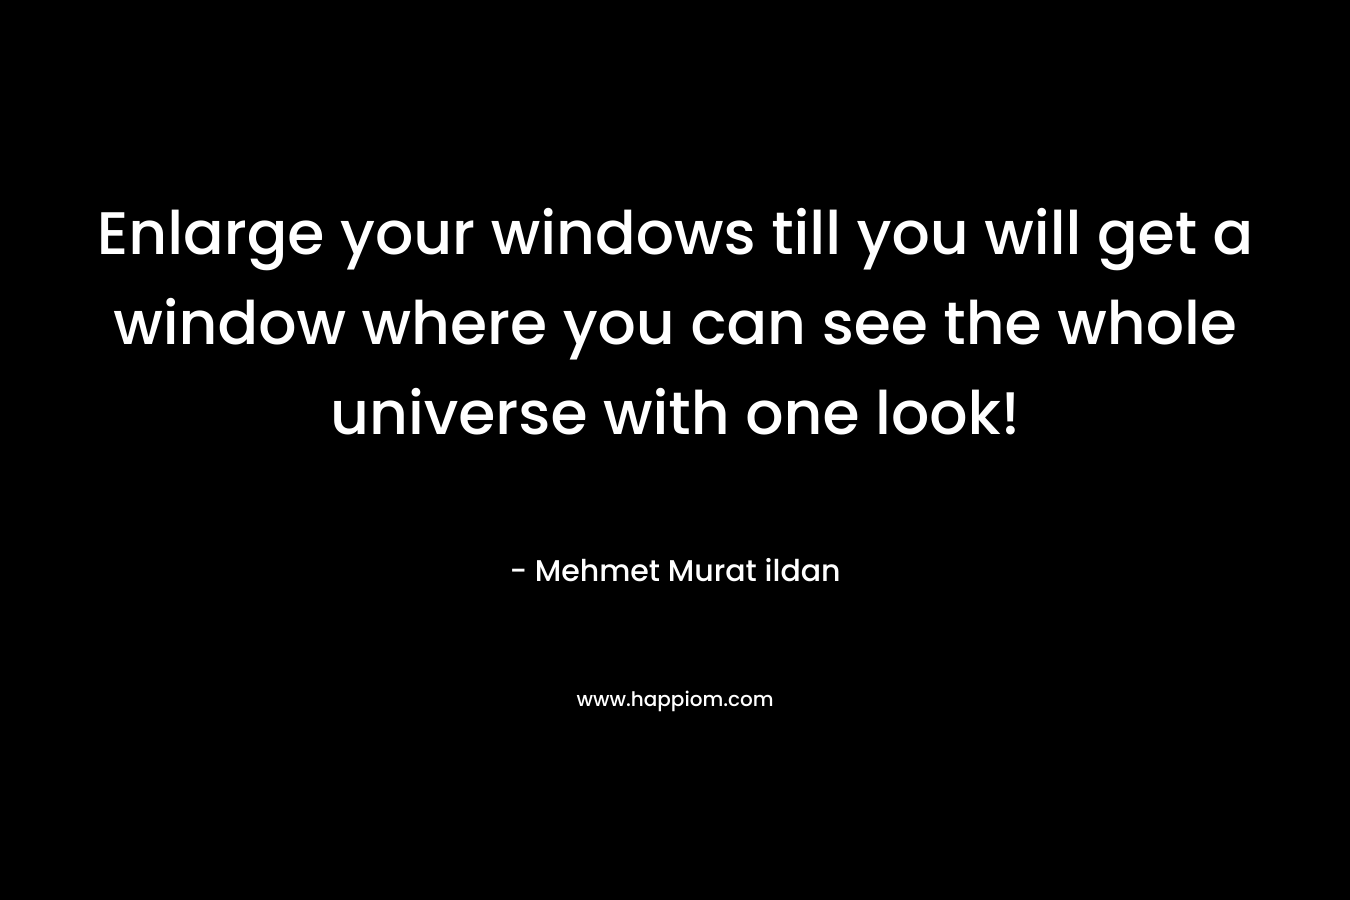 Enlarge your windows till you will get a window where you can see the whole universe with one look!